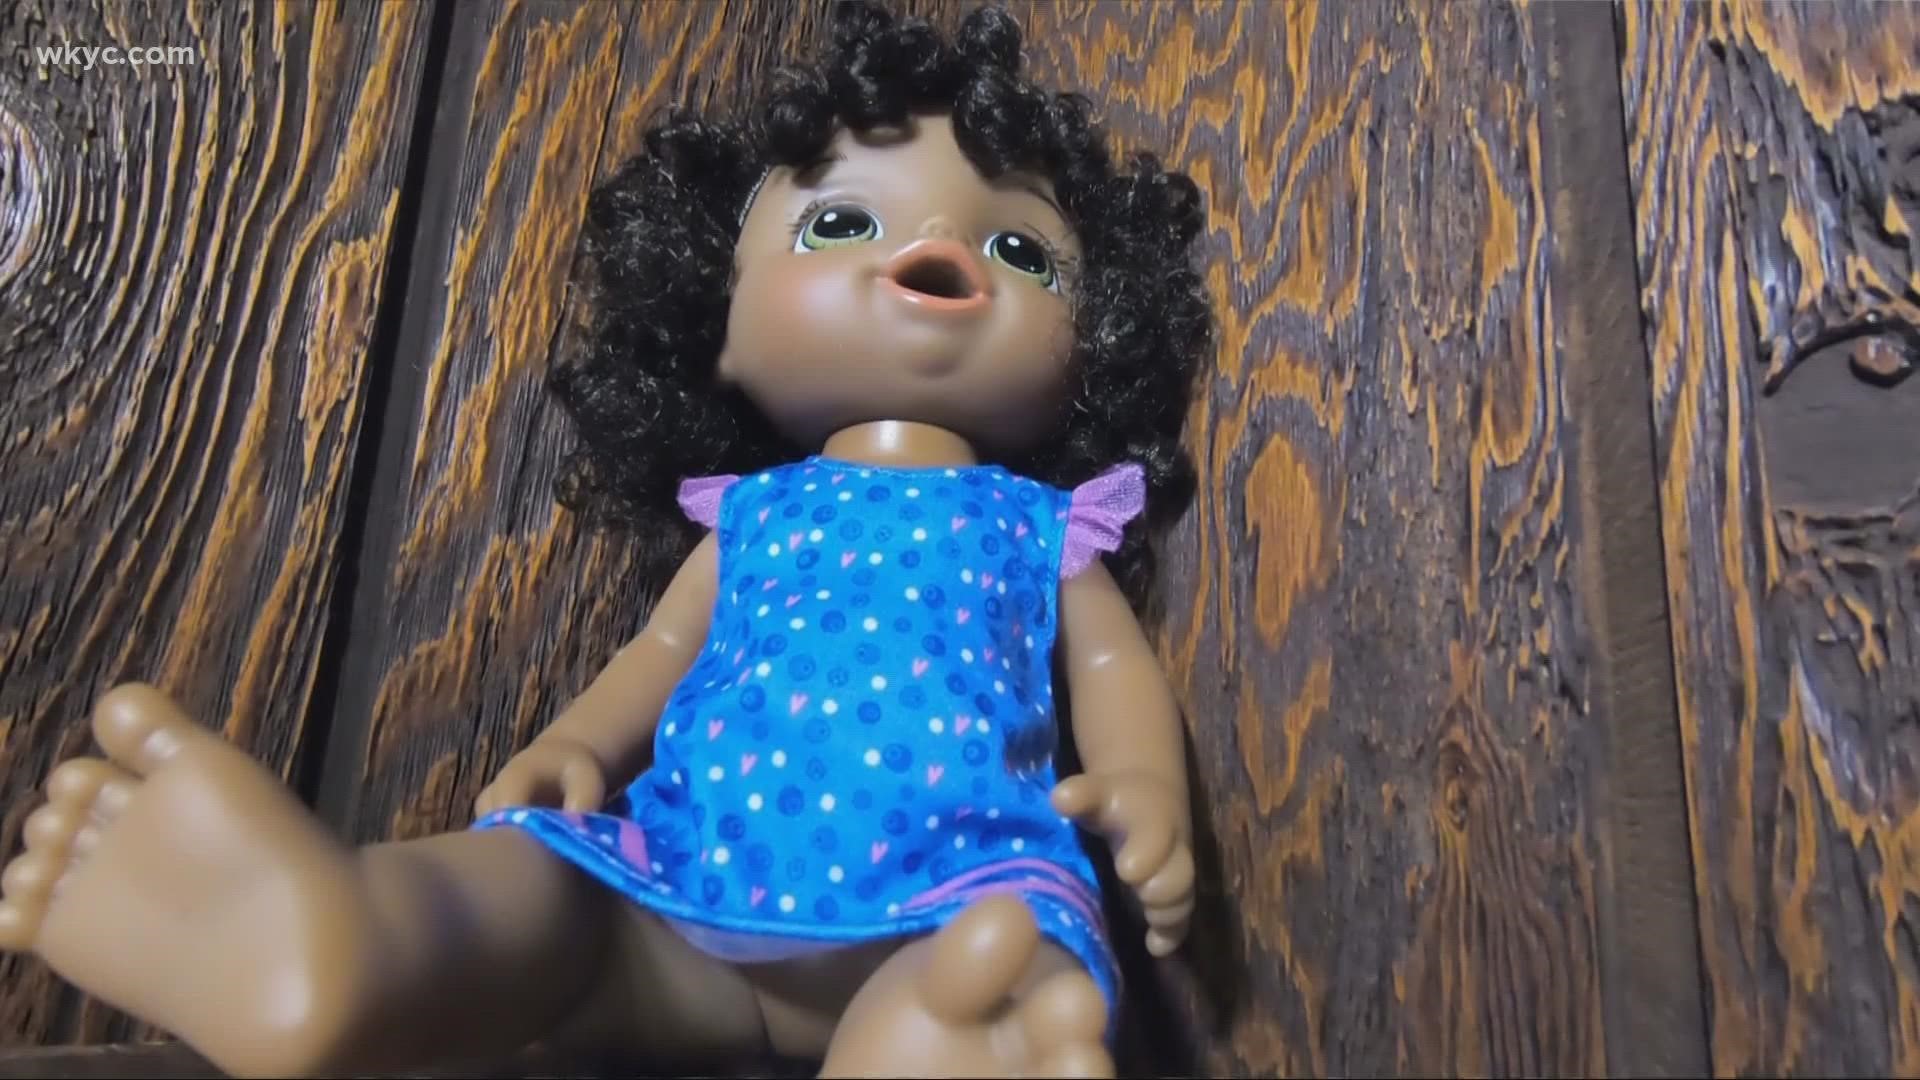 A Texas A&M assistant professor conducts a new version of the Clark's baby doll study to see how far America has come.